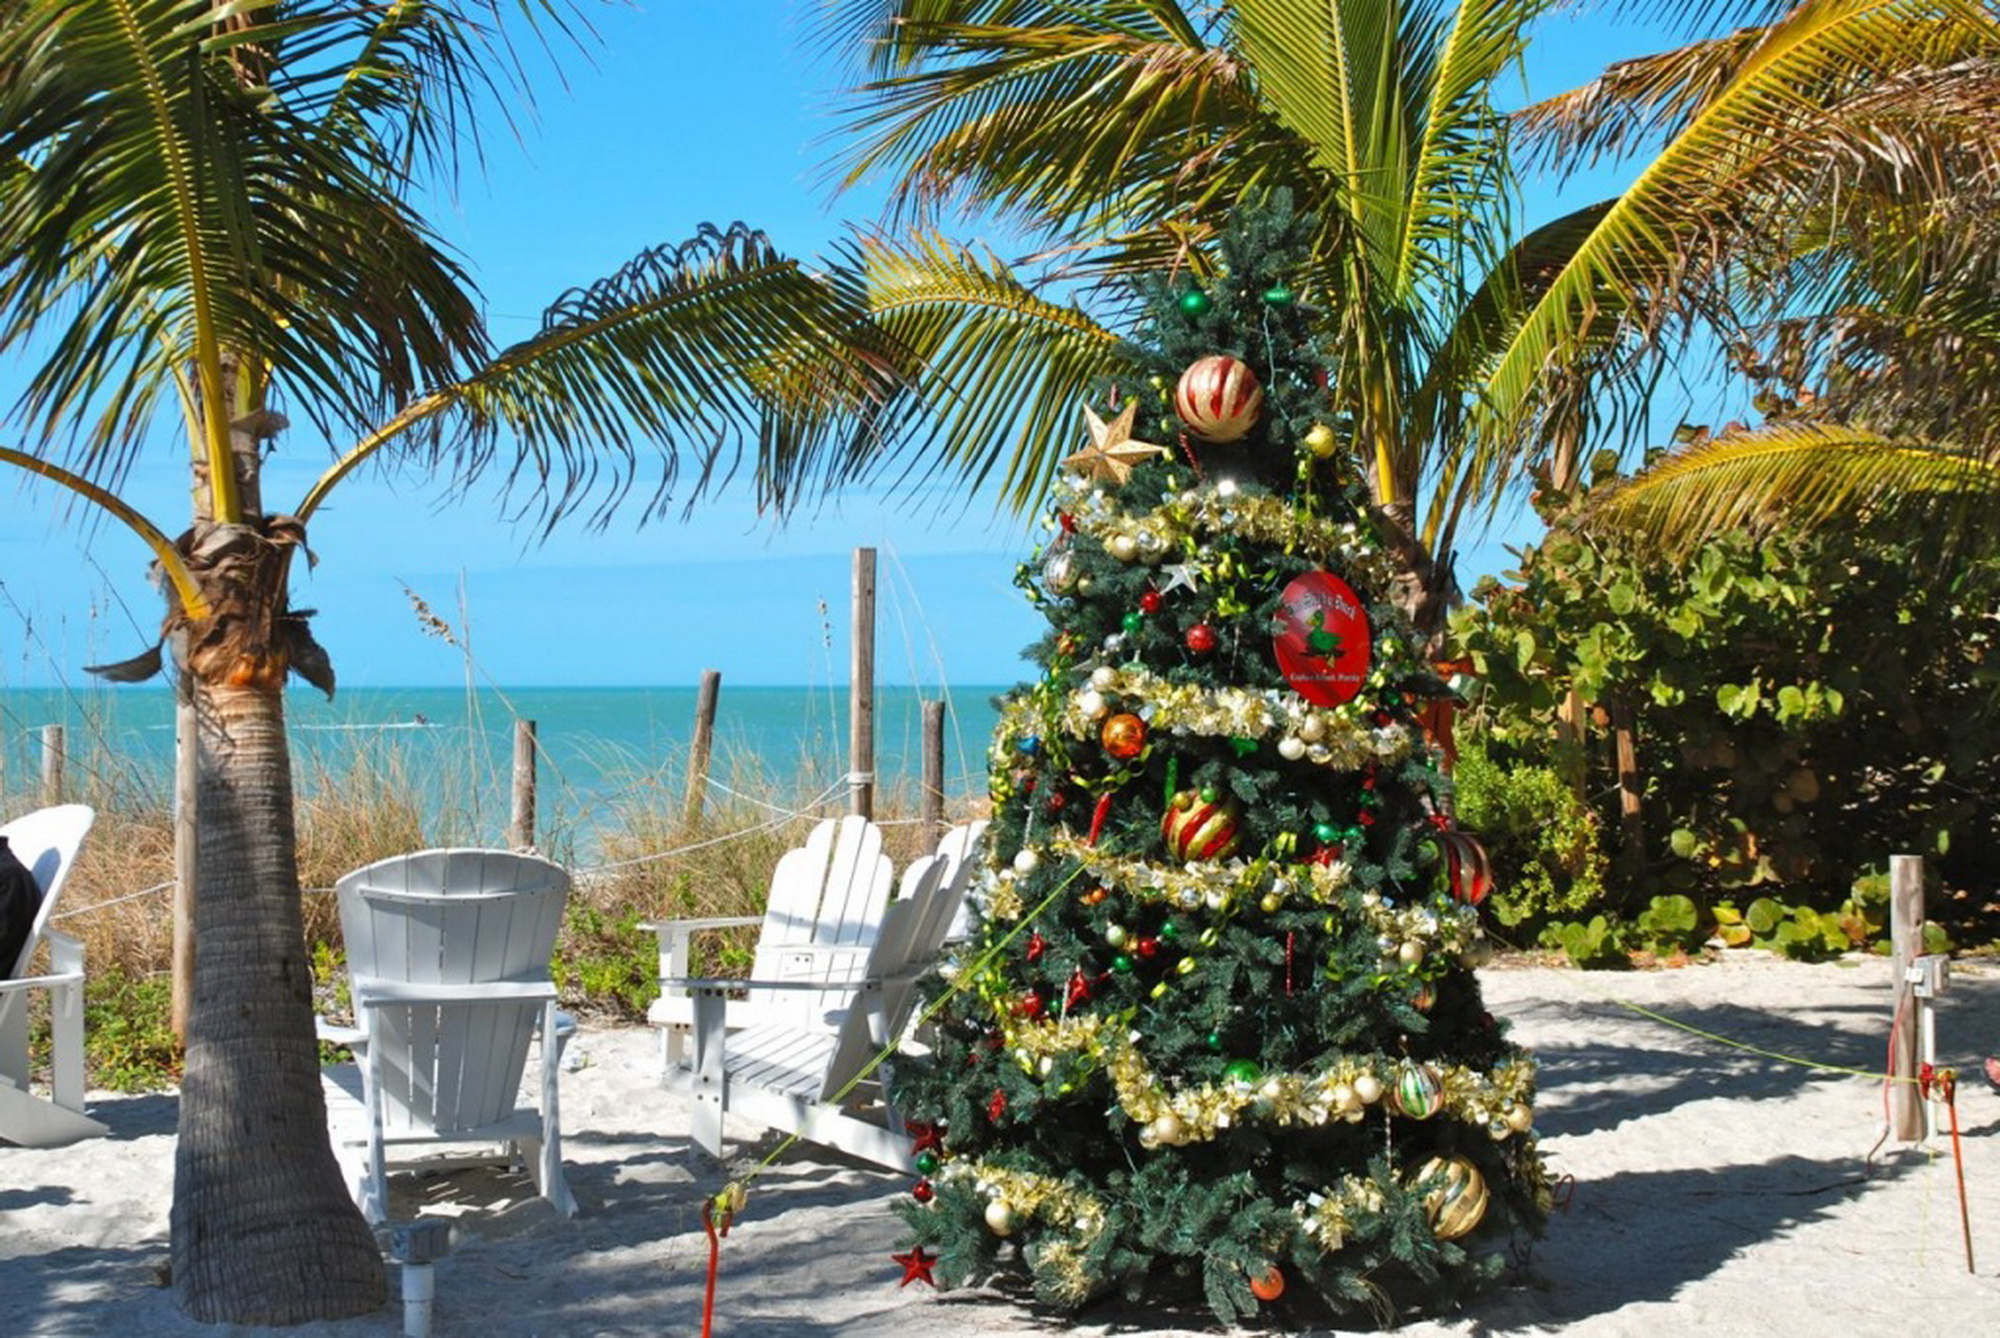 South Florida Vacation Rental Accommodations During The Holidays 1 Personal Injury South Florida Injury Law Firm